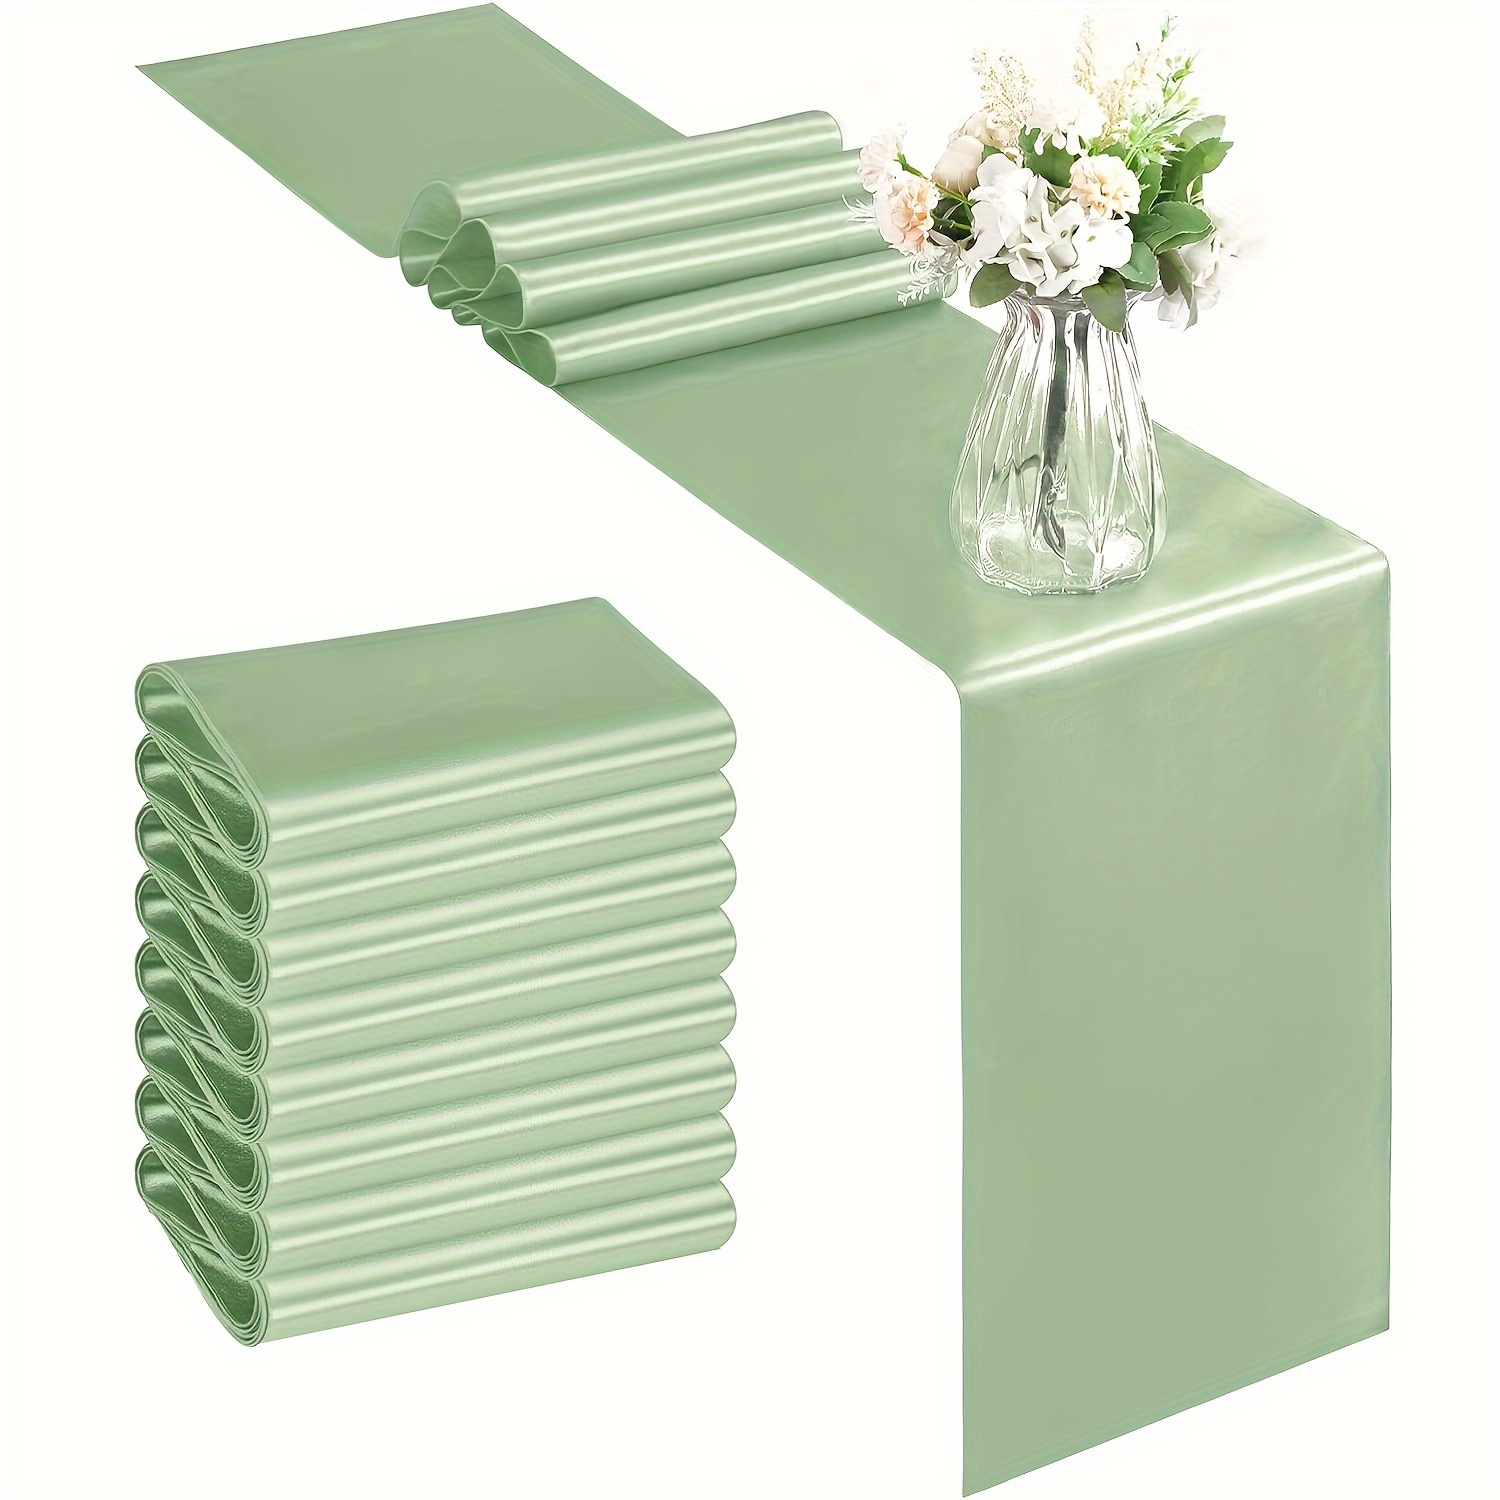 

8-pack Sage Green Satin Table Runners 12"x108" - Elegant Rectangle Table Decor For Parties, Birthdays, Graduations, And Engagements - Solid Color, Polyester Knit Fabric, Machine Washable